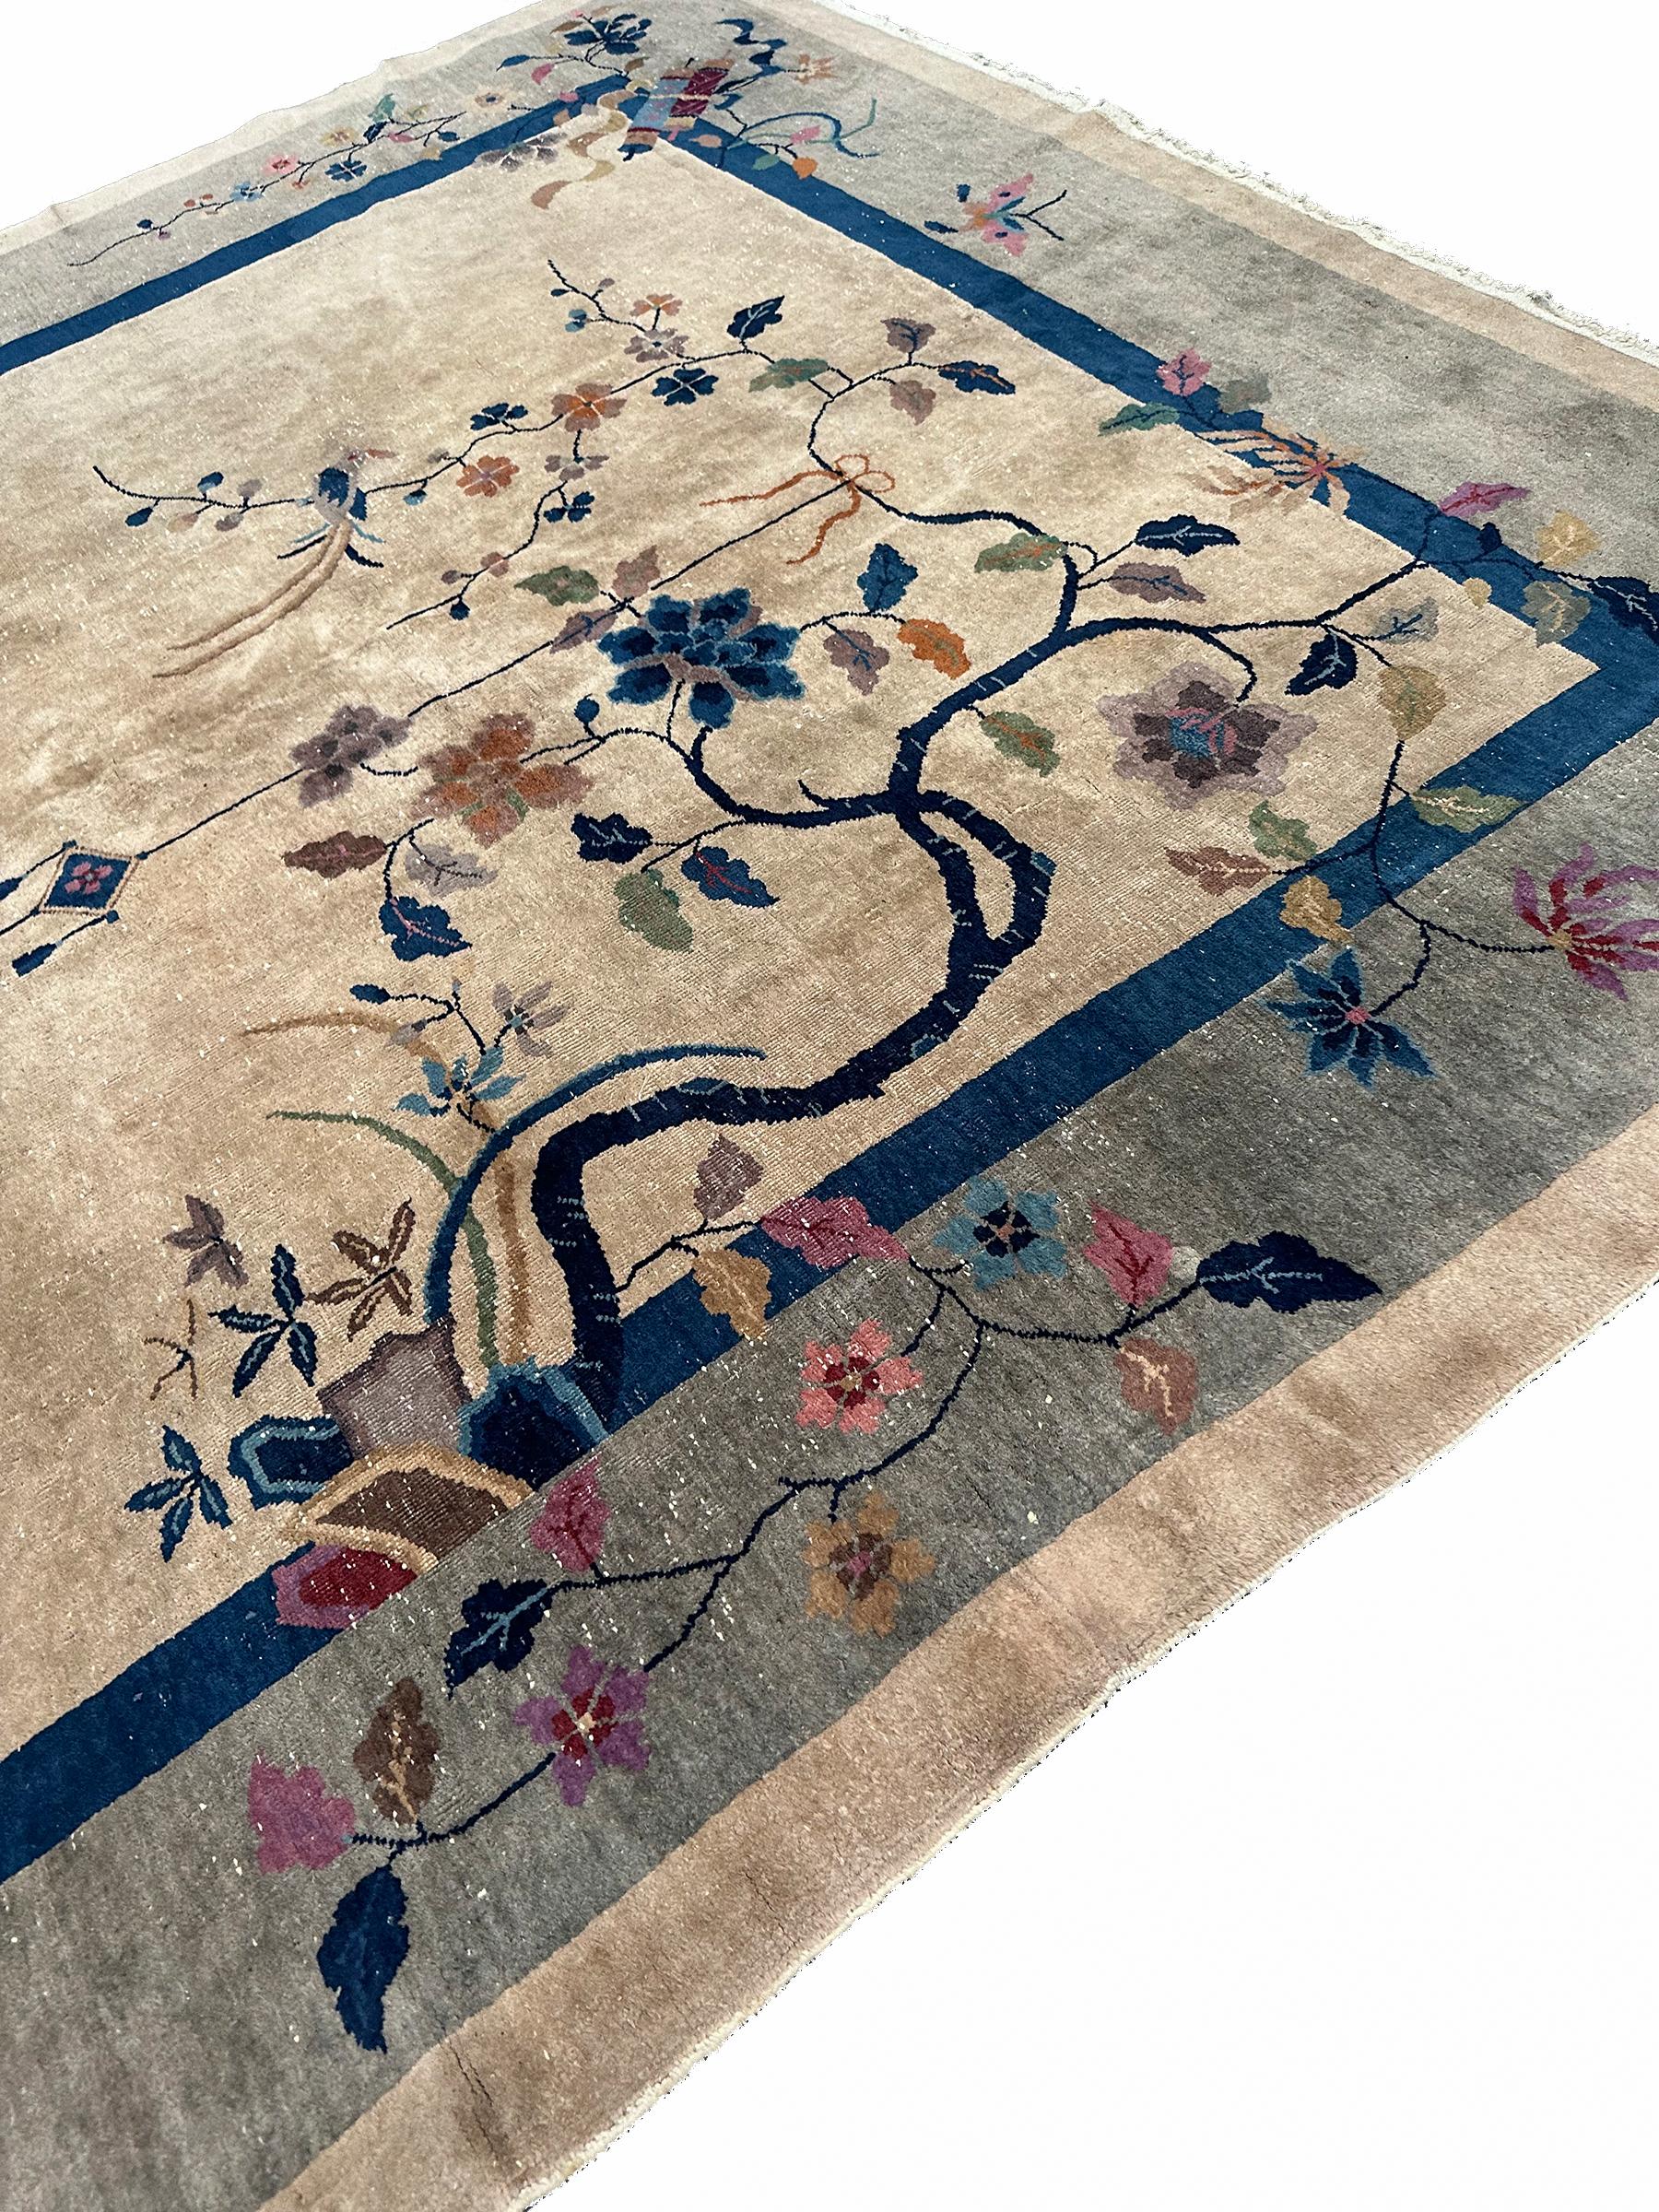 1920 Walter Nichols Antique Chinese Art Deco Rug Tree of Life 9x12 275cm x 351cm For Sale 1